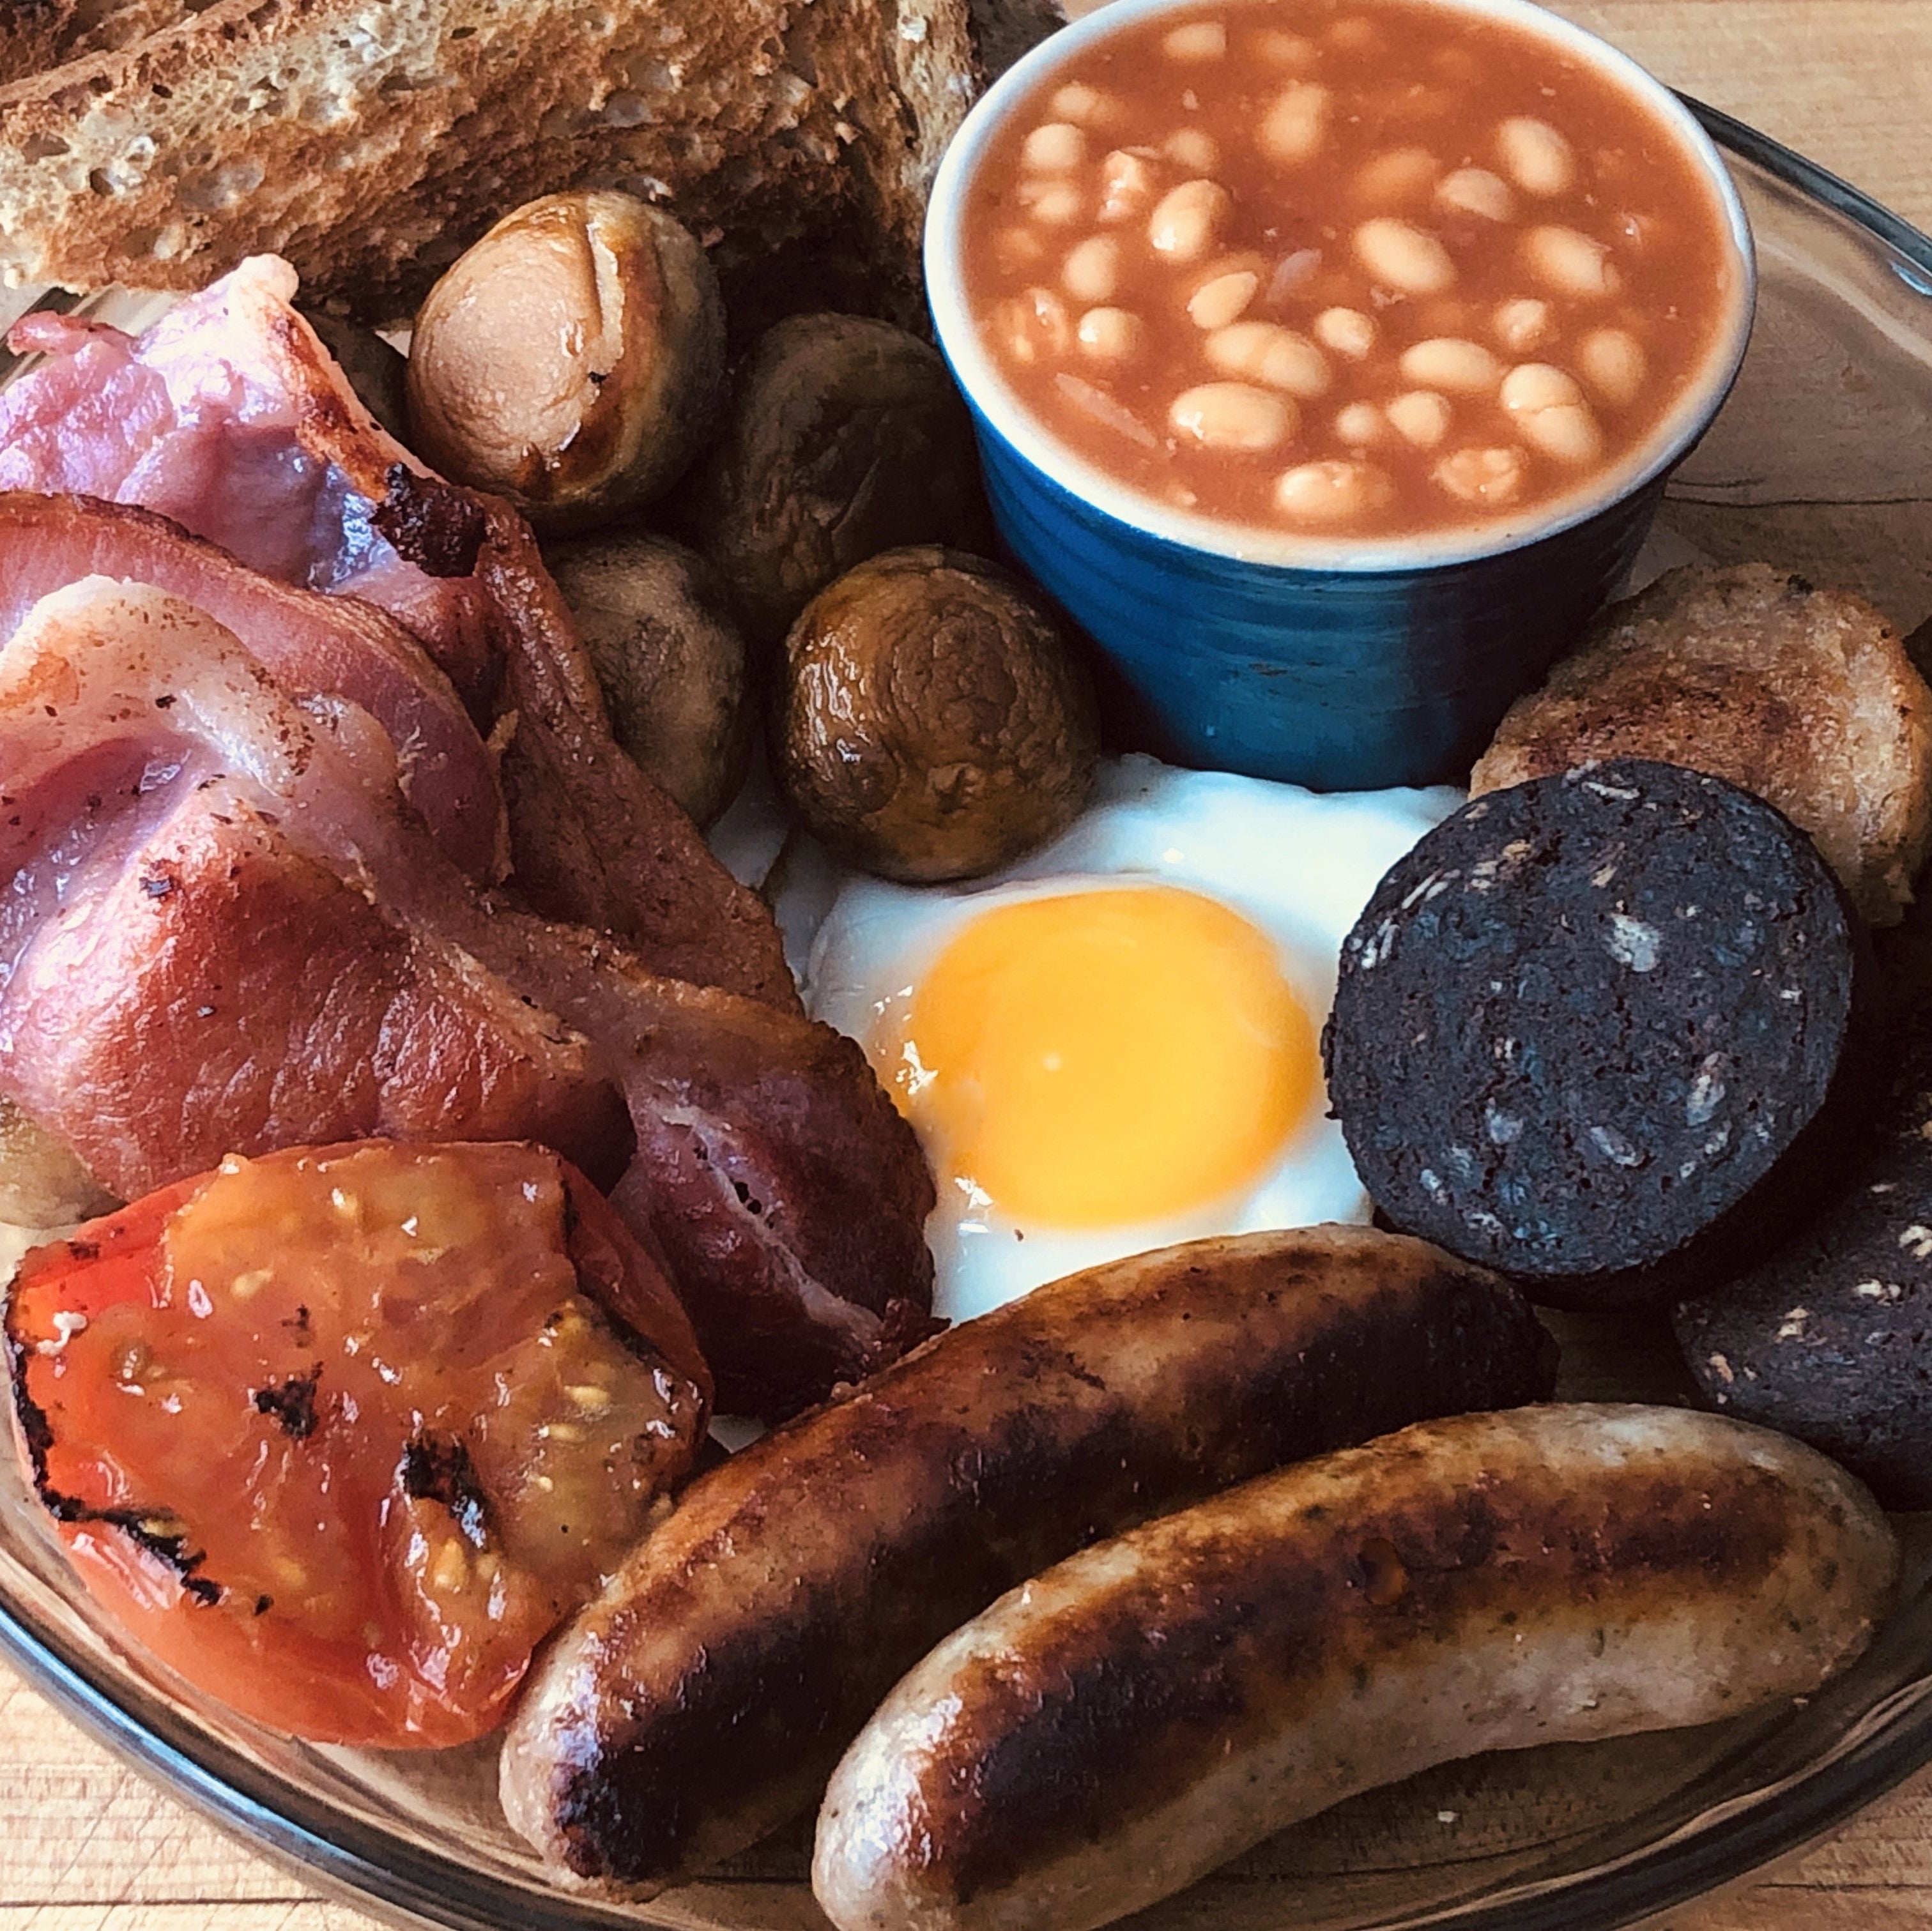 Grilled Full English Breakfast